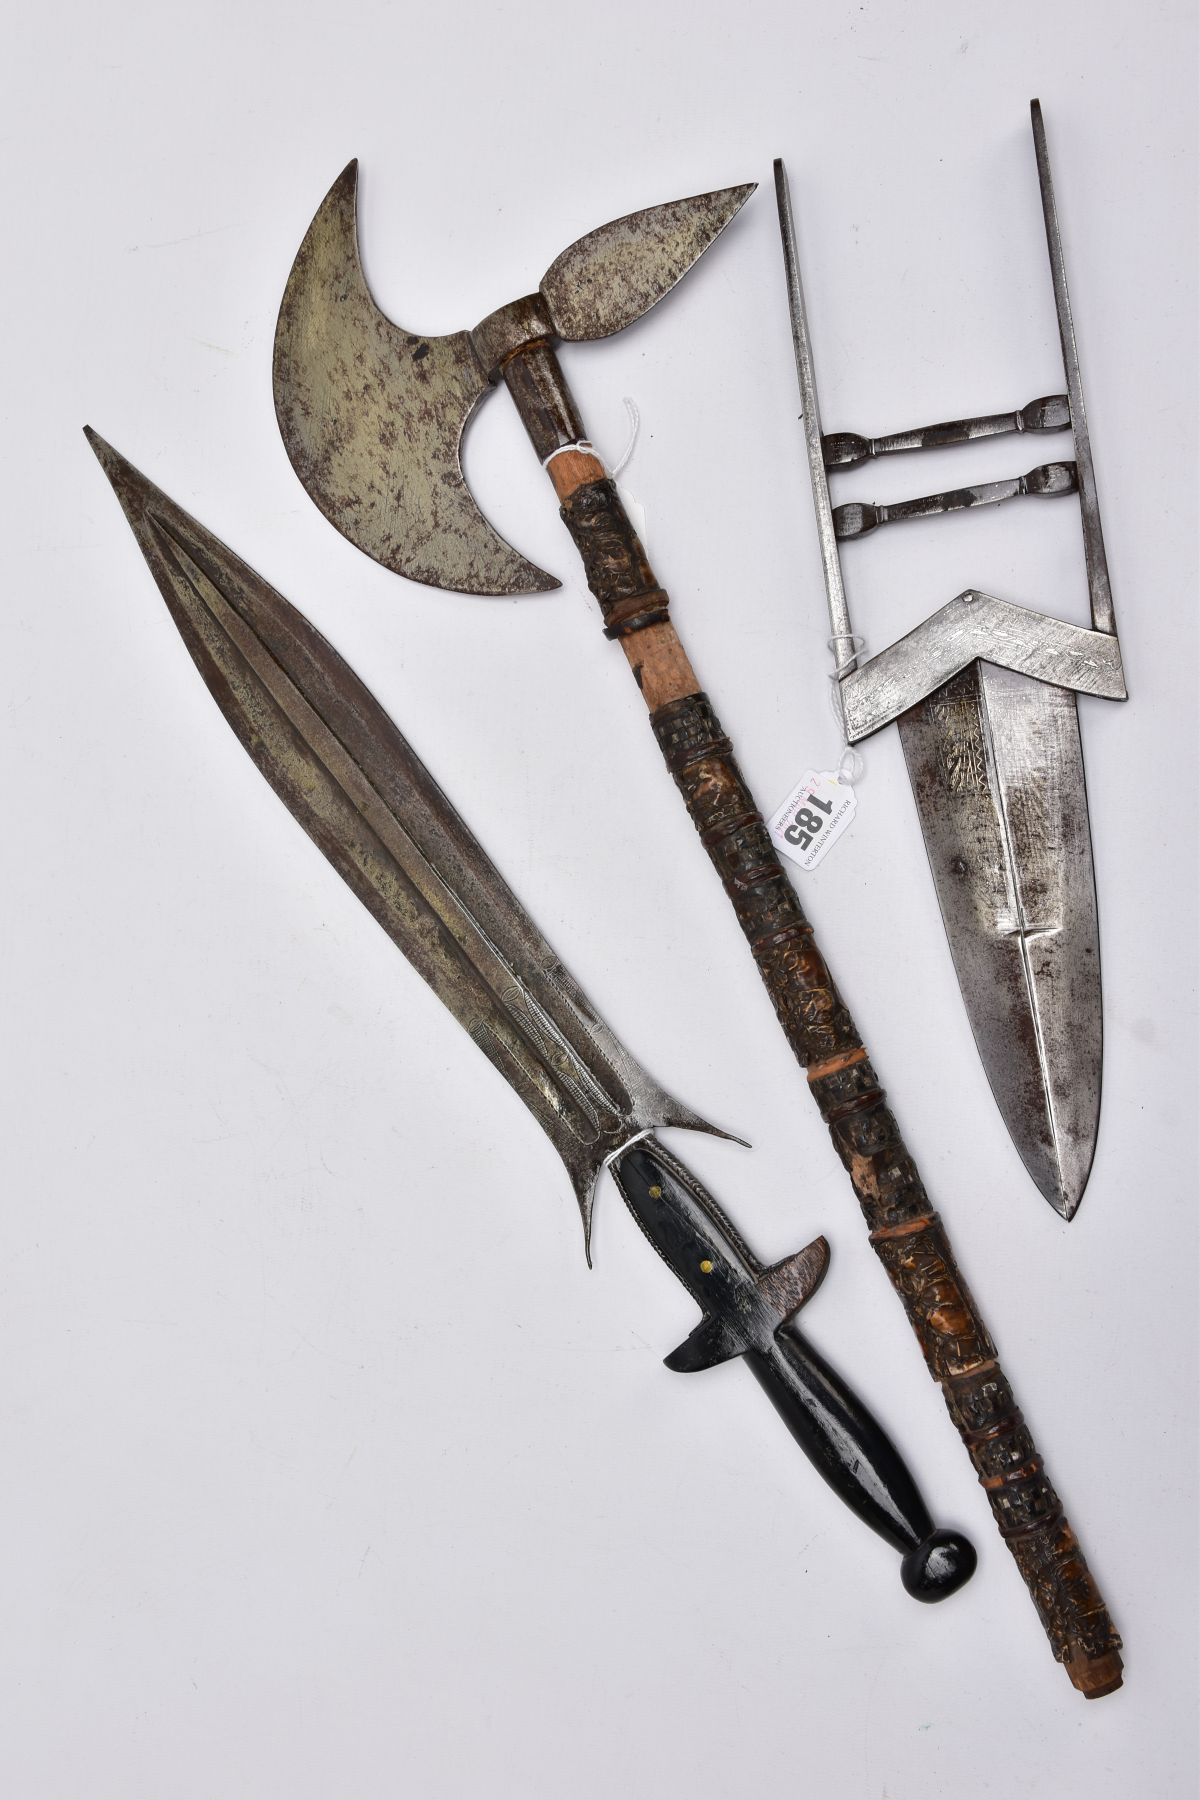 THREE BLADED WEAPONS OF EASTERN EUROPEAN/AFRICAN/ASIAN ORIGINS comprising of a small hand axe